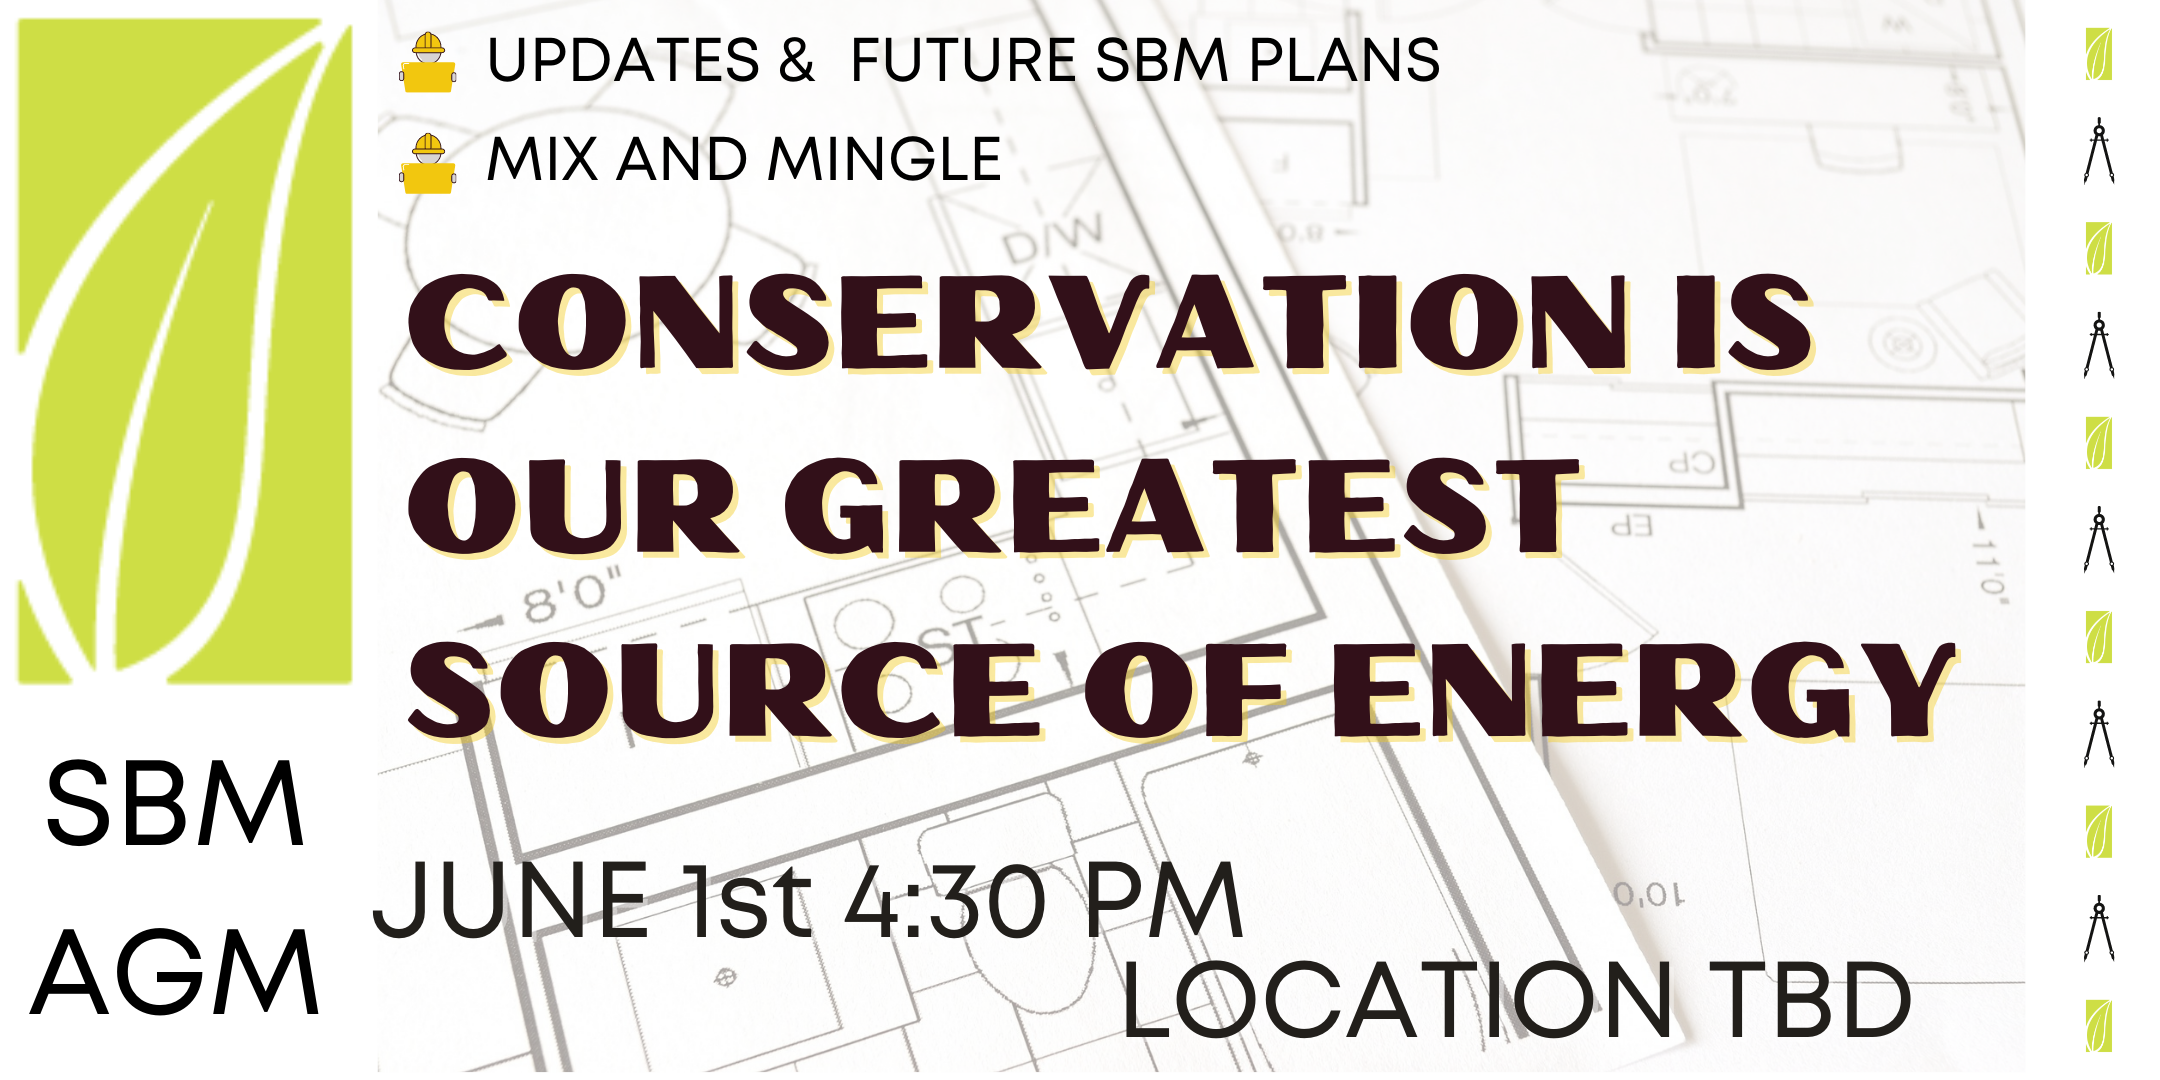 Poster for June 1st SBM AGM Conservation is our greatest source of energy